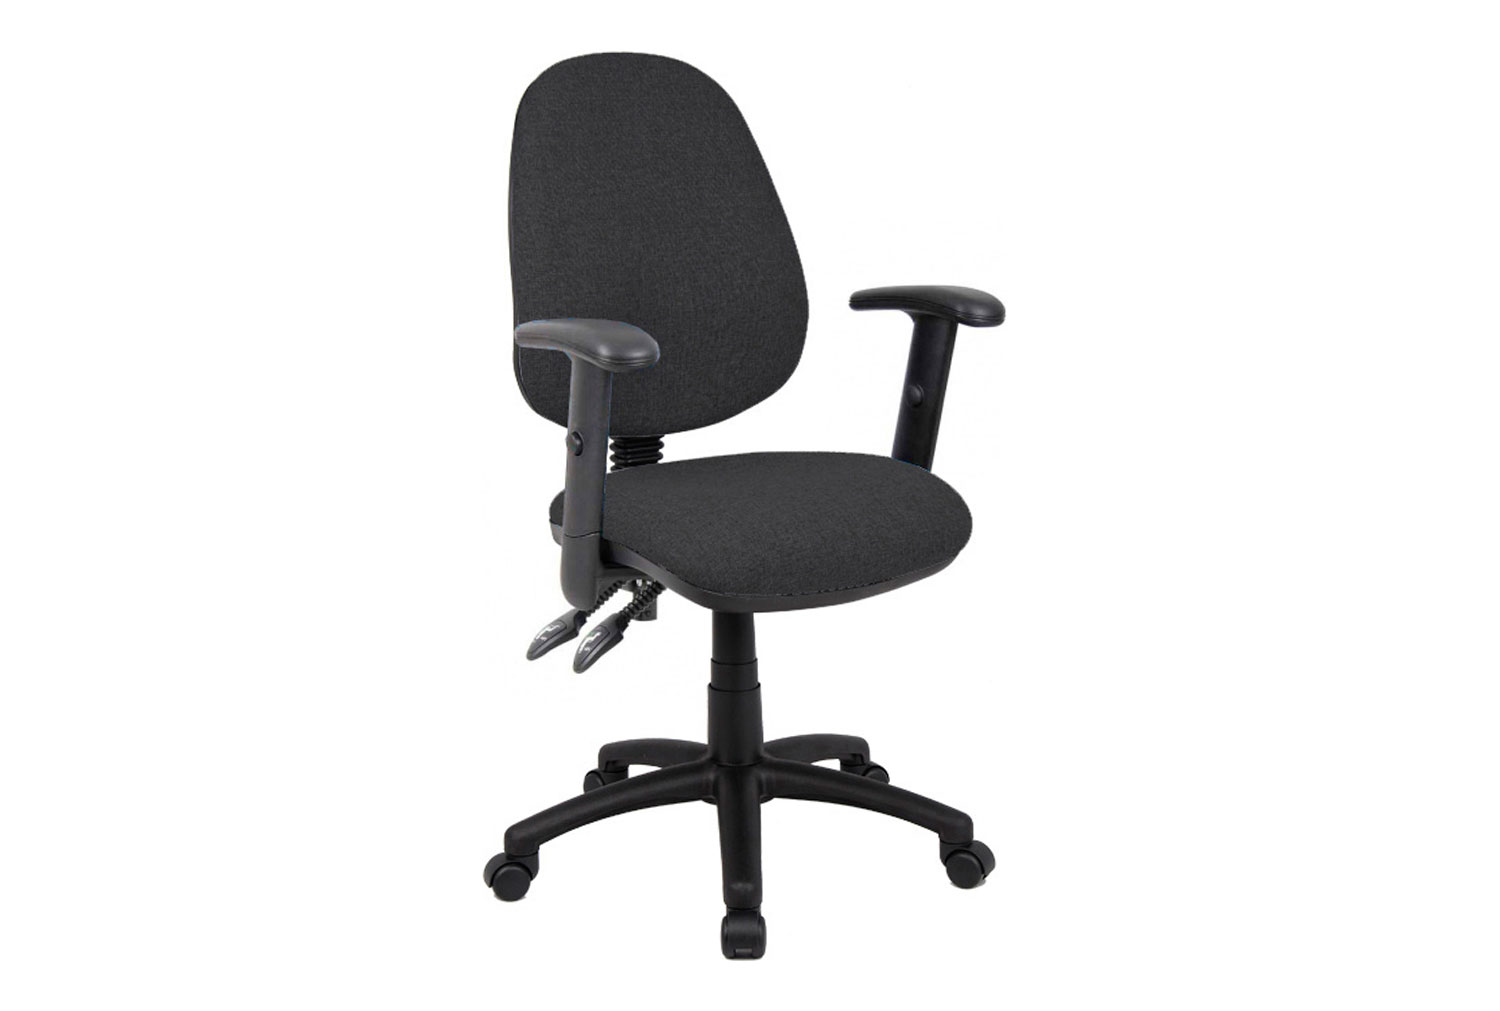 Full Lumbar 2 Lever Operator Office Chair With Adjustable Arms, Charcoal, Fully Installed